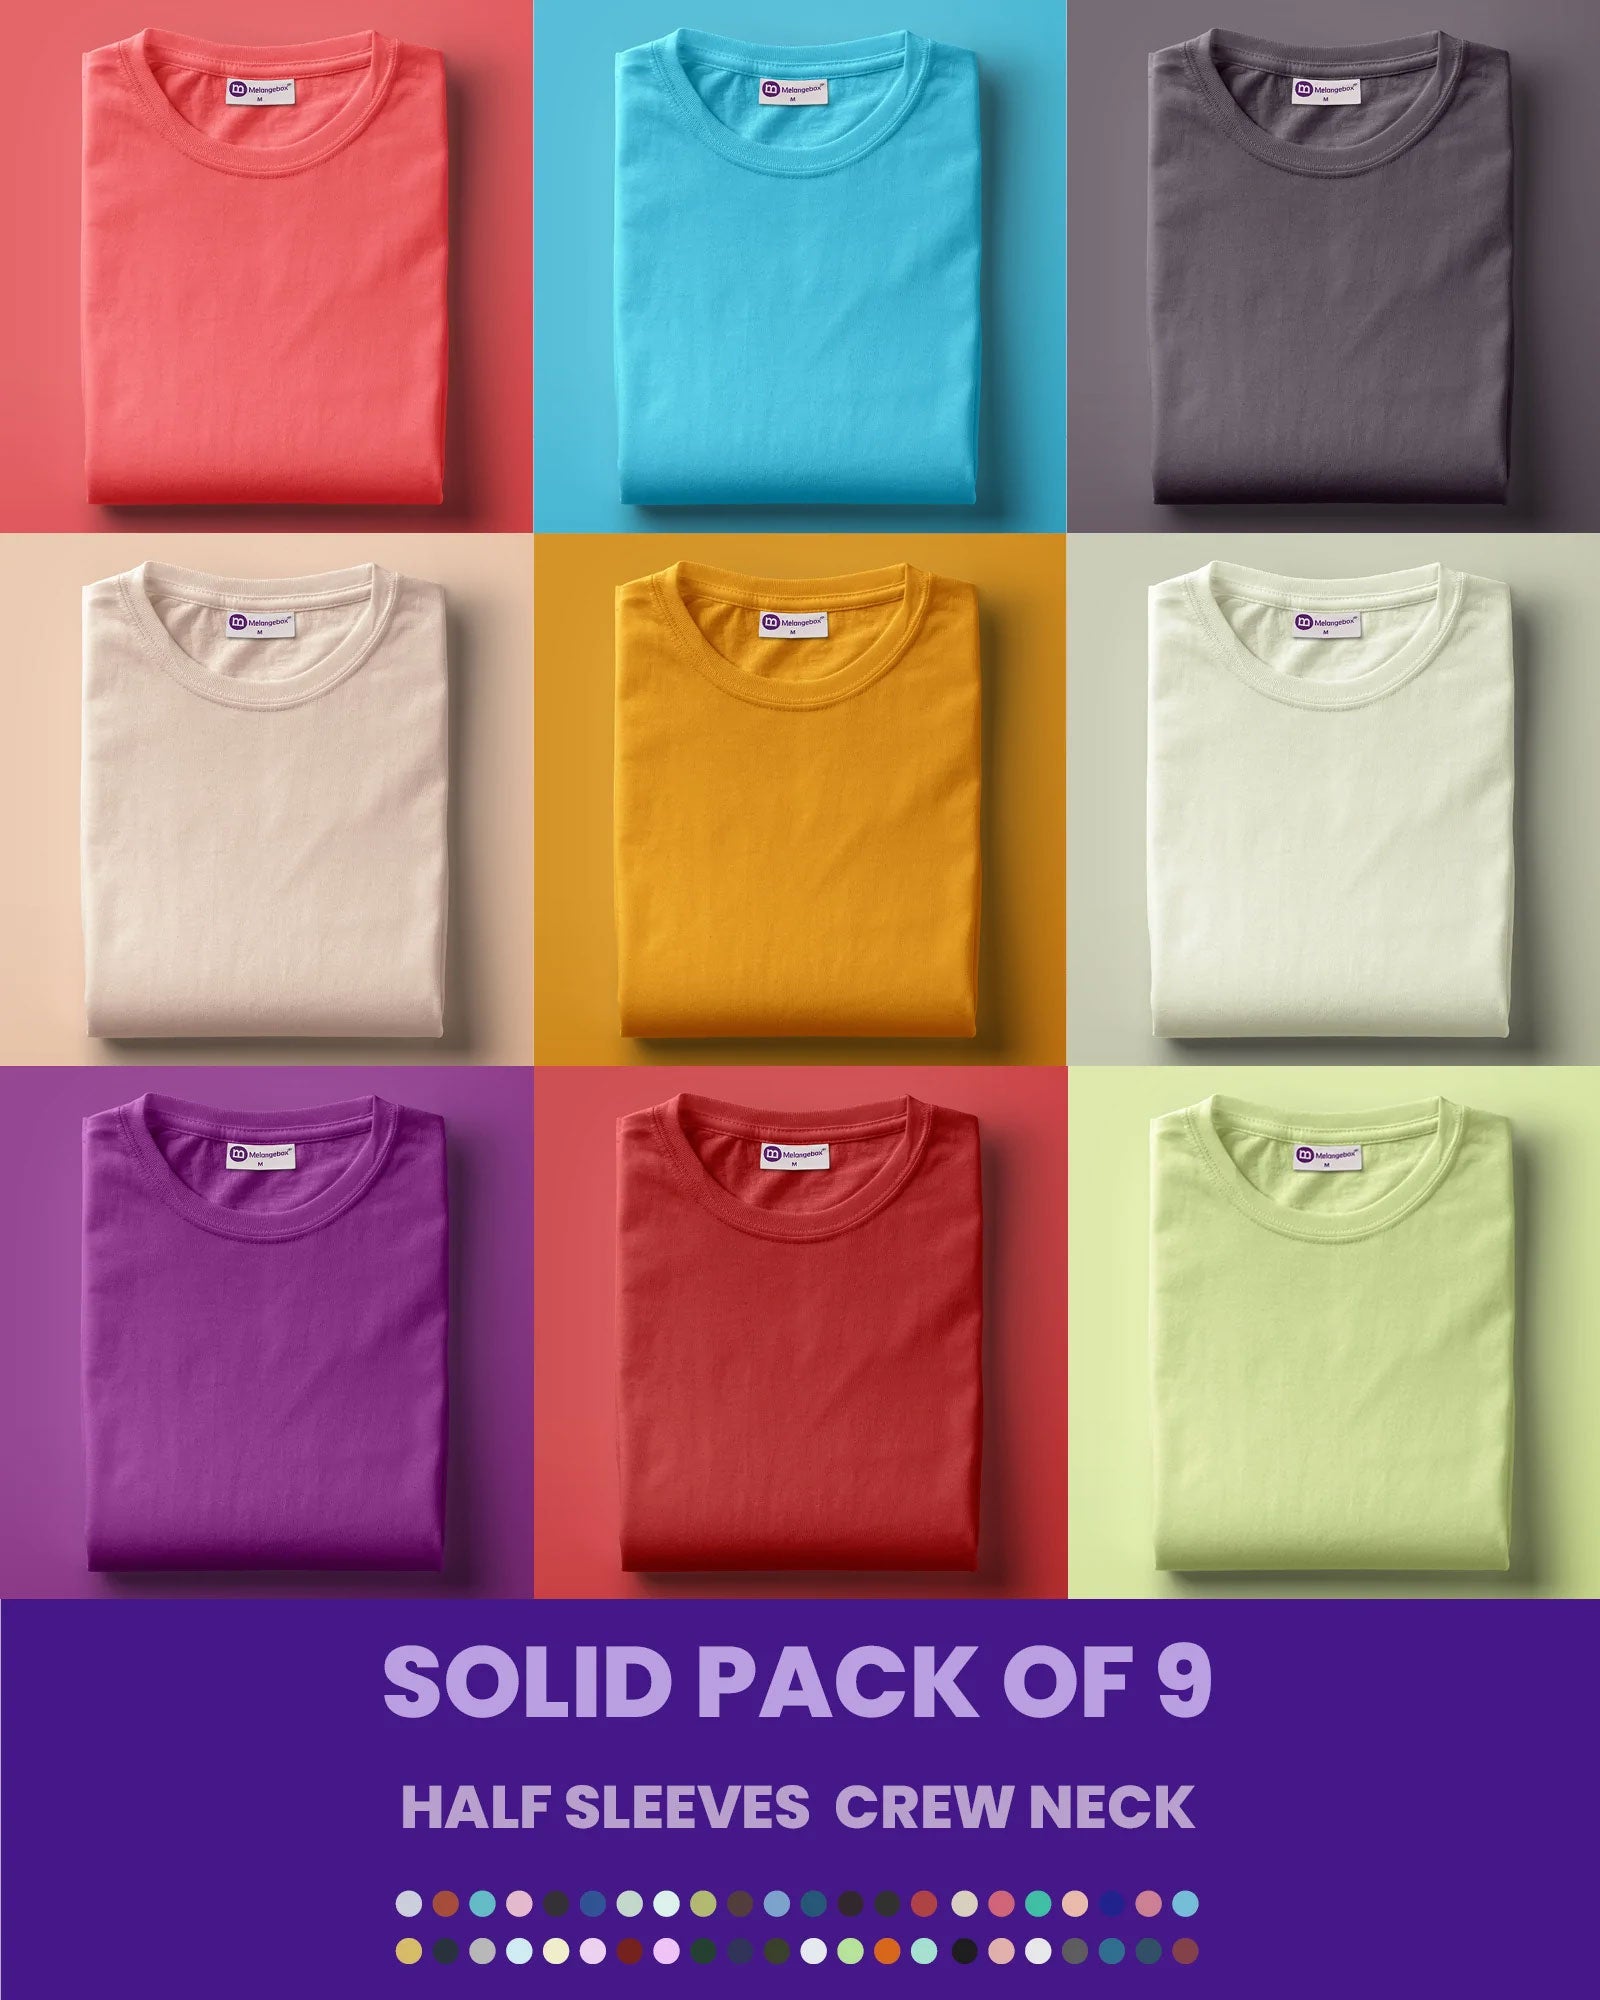 Solid Pack of 9: Half Sleeves Crew Neck